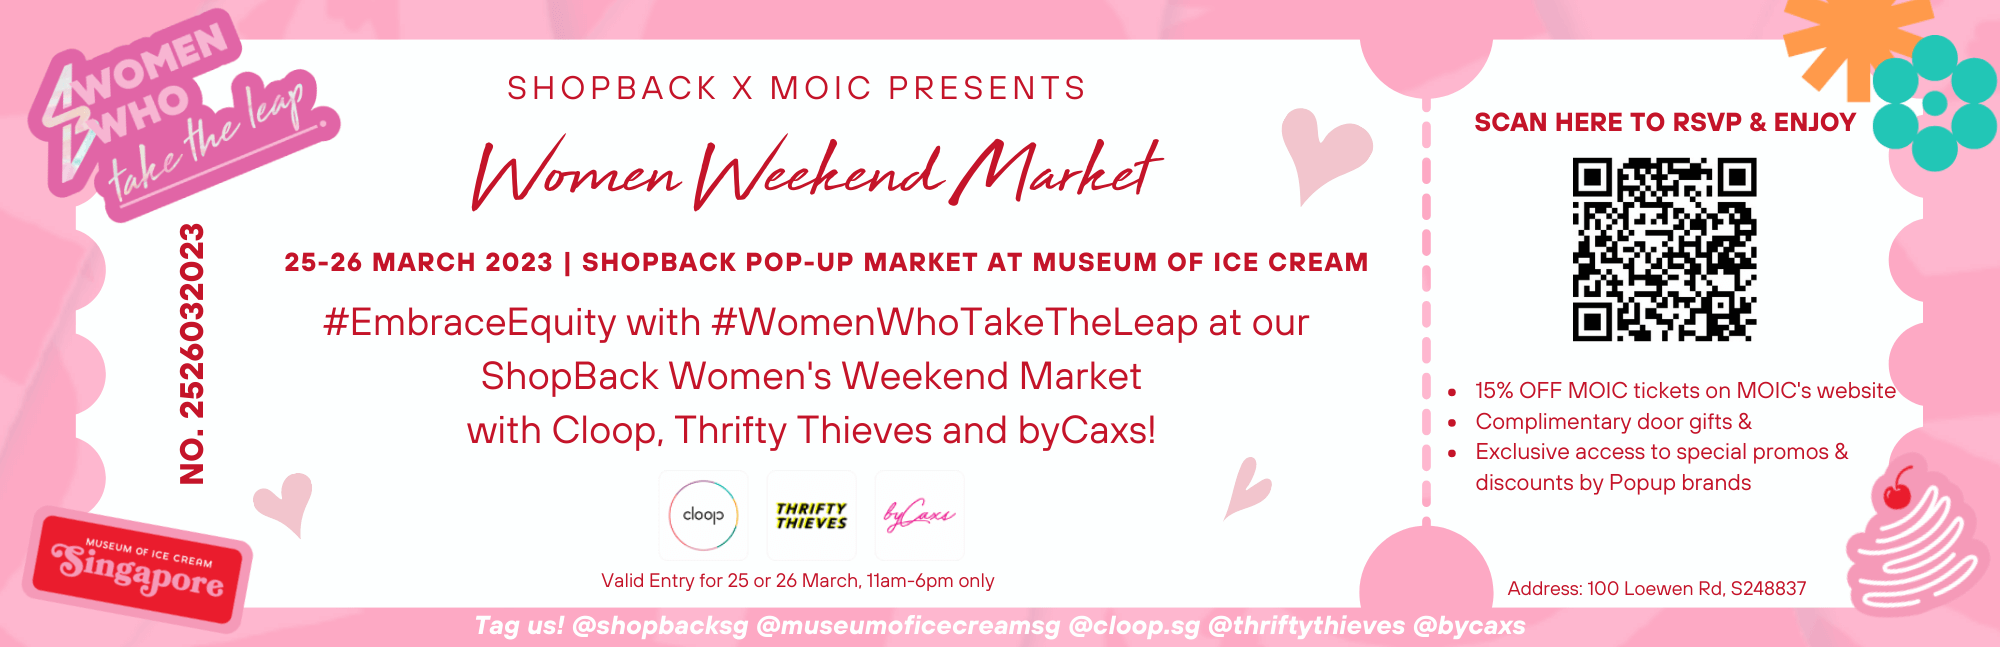 ShopBack Women’s Weekend Market at the Museum